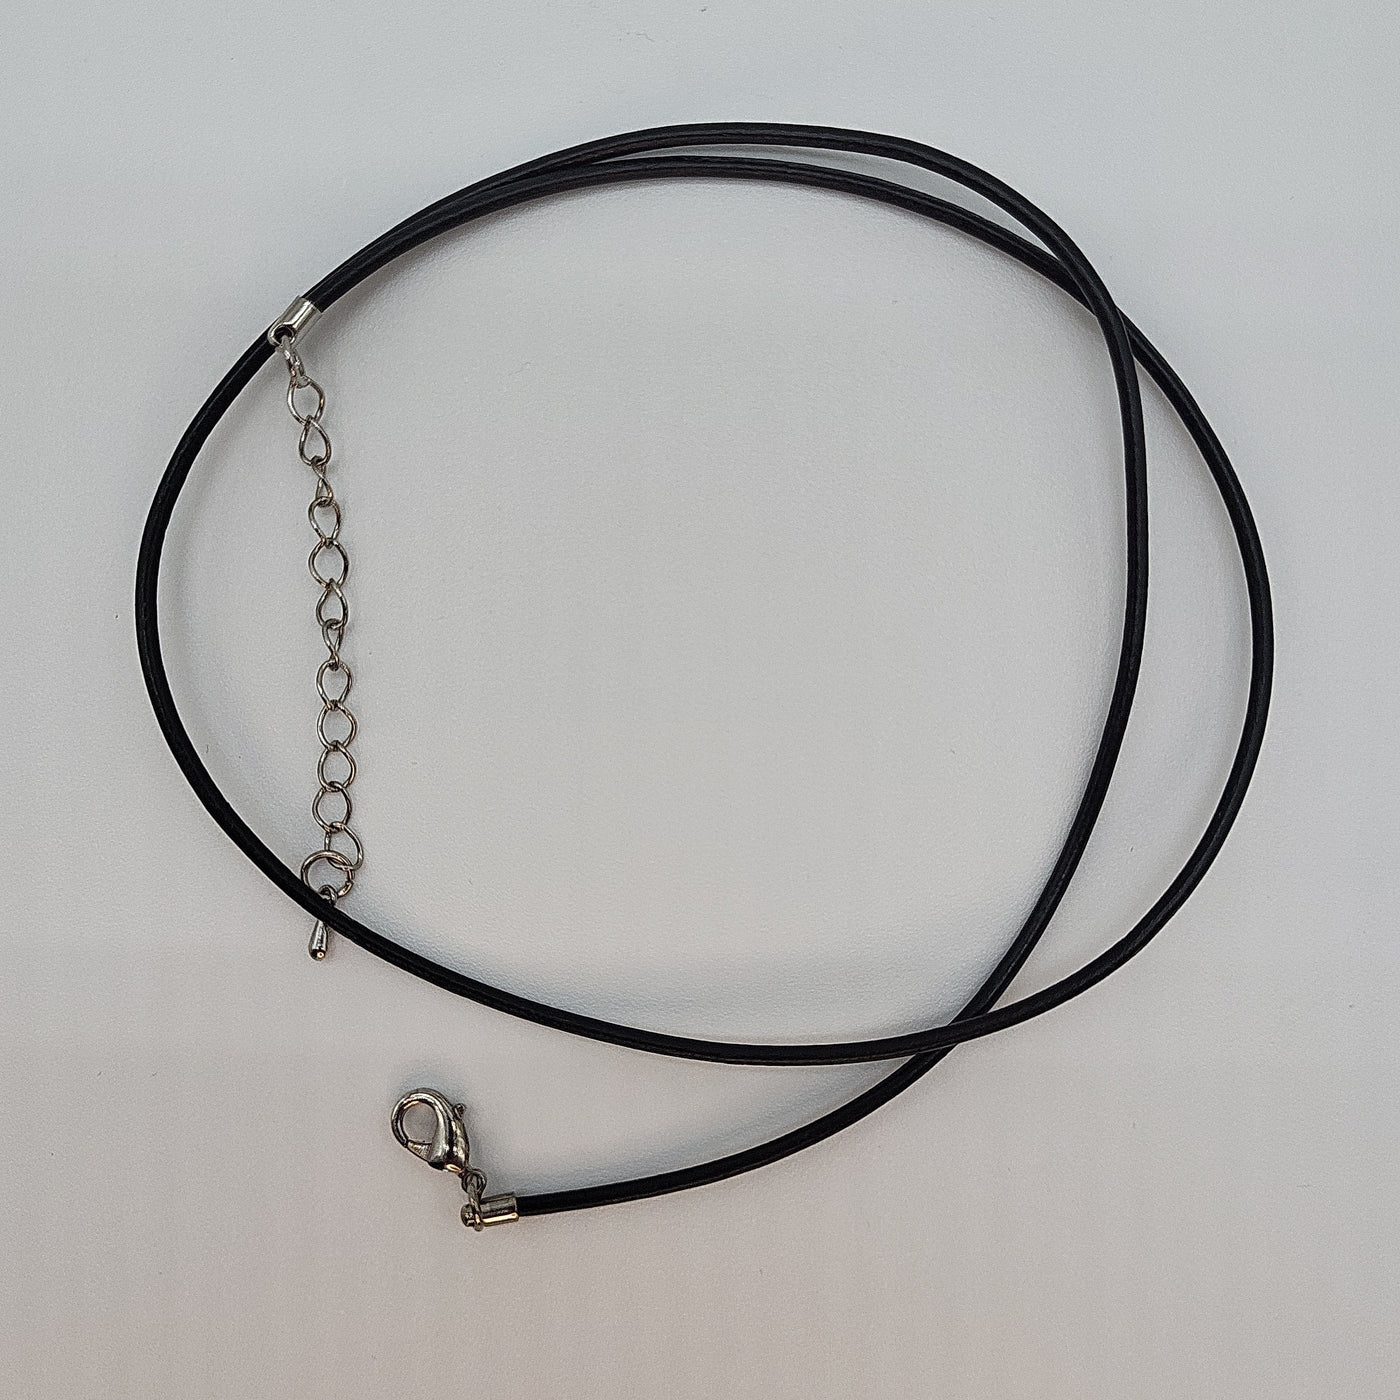 Necklace 24" Leather Cord